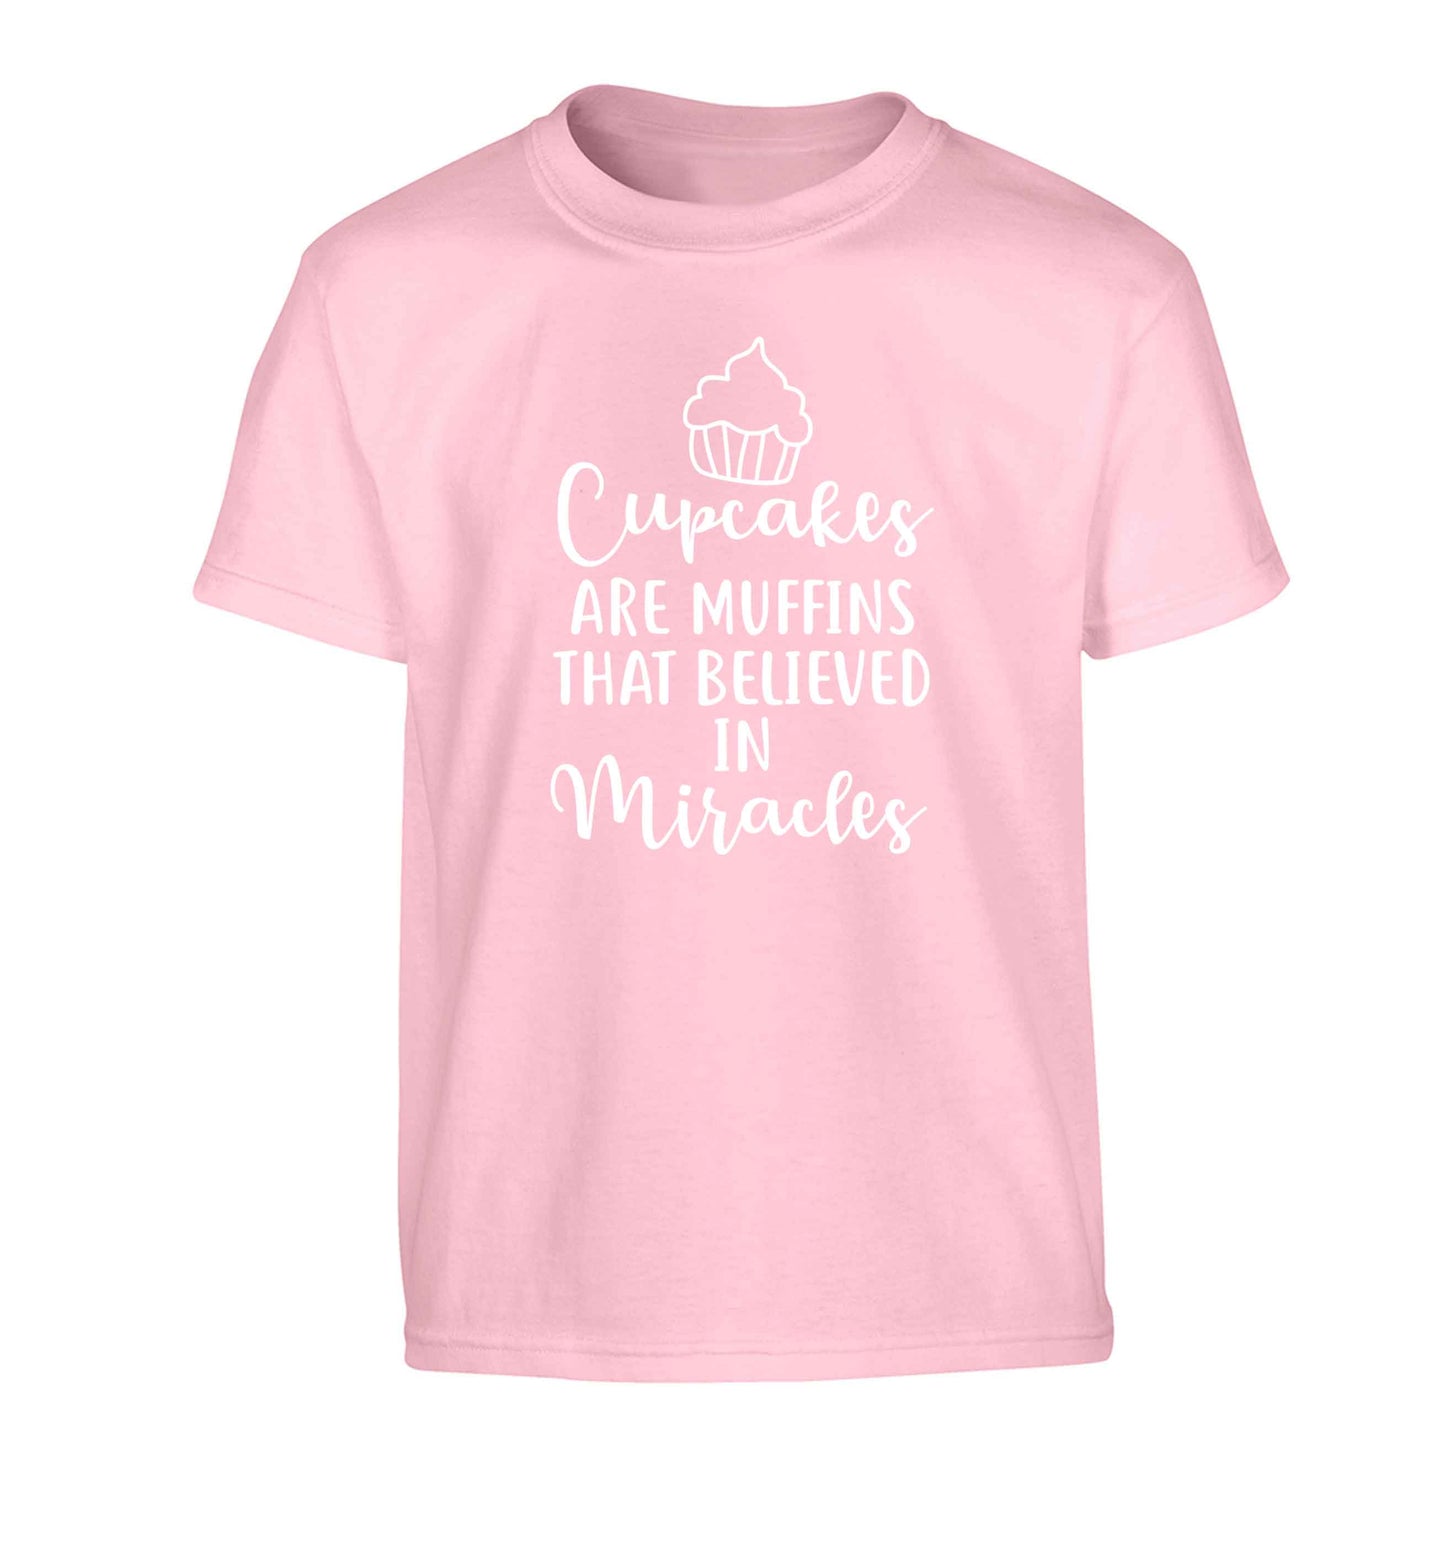 Cupcakes muffins that believed in miracles Children's light pink Tshirt 12-13 Years